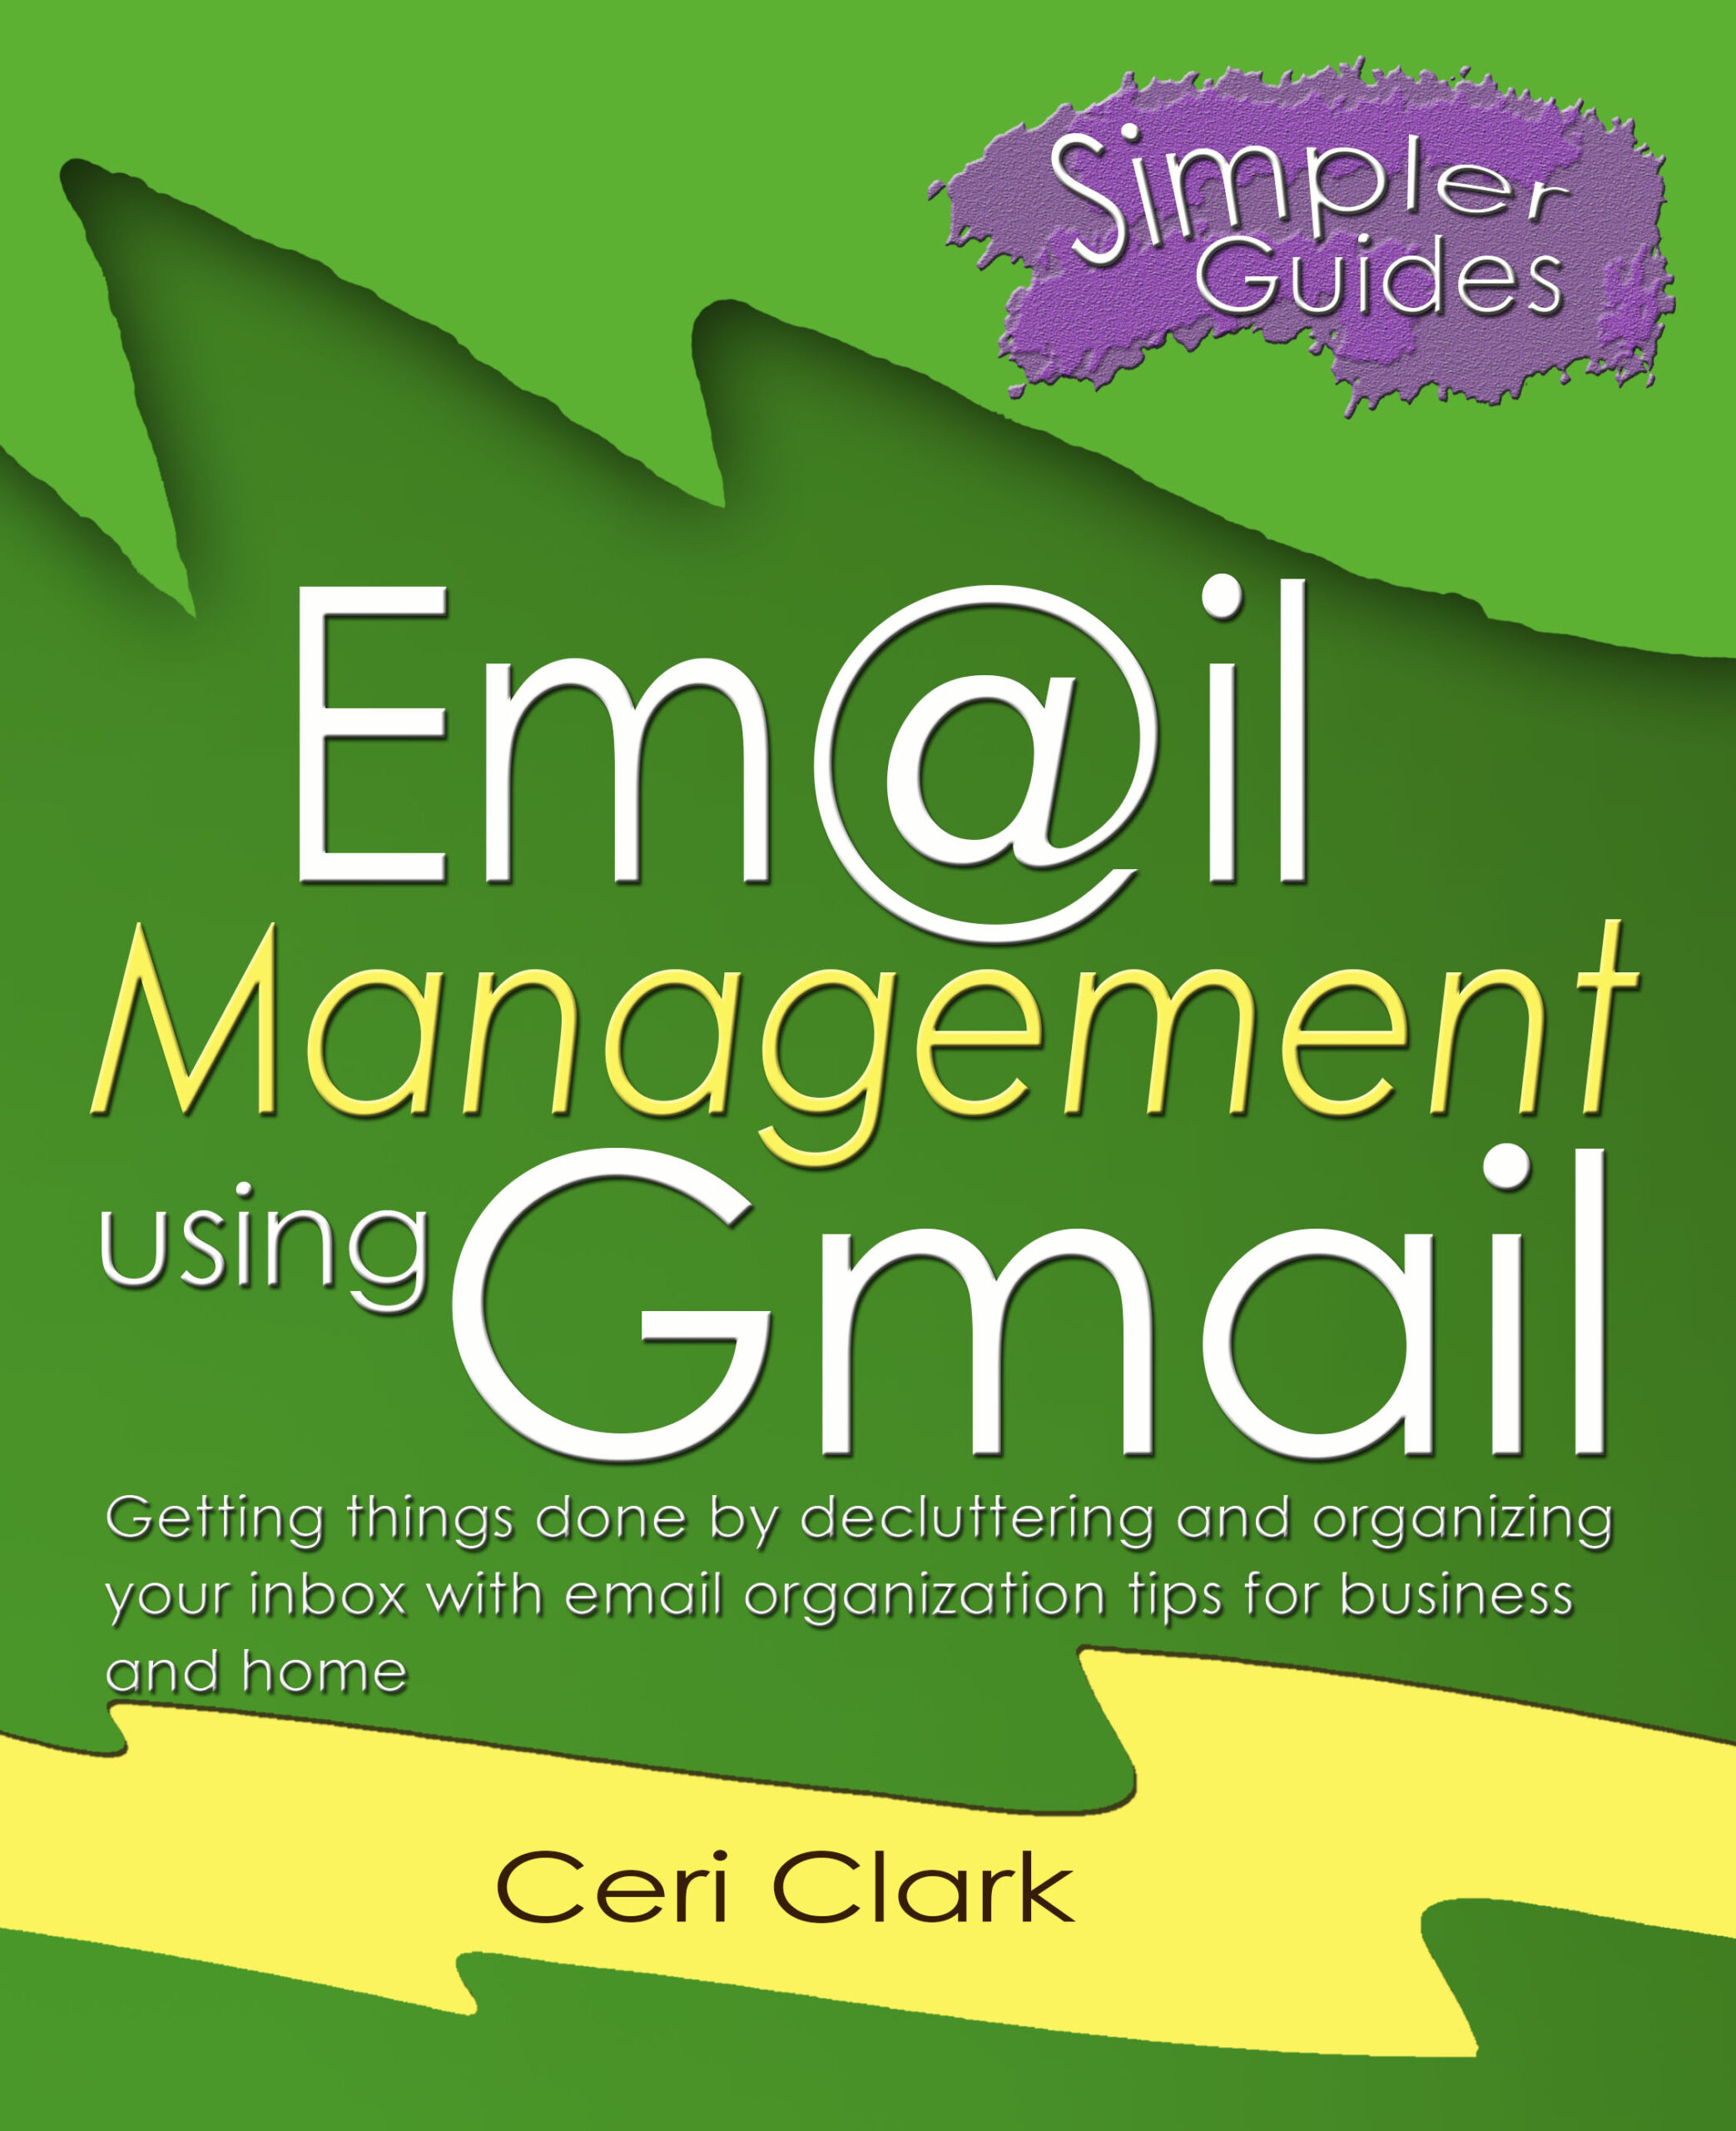 Email Management using Gmail: Getting things done by decluttering and organizing your inbox with email organization tips for business and home (Simpler Guides)